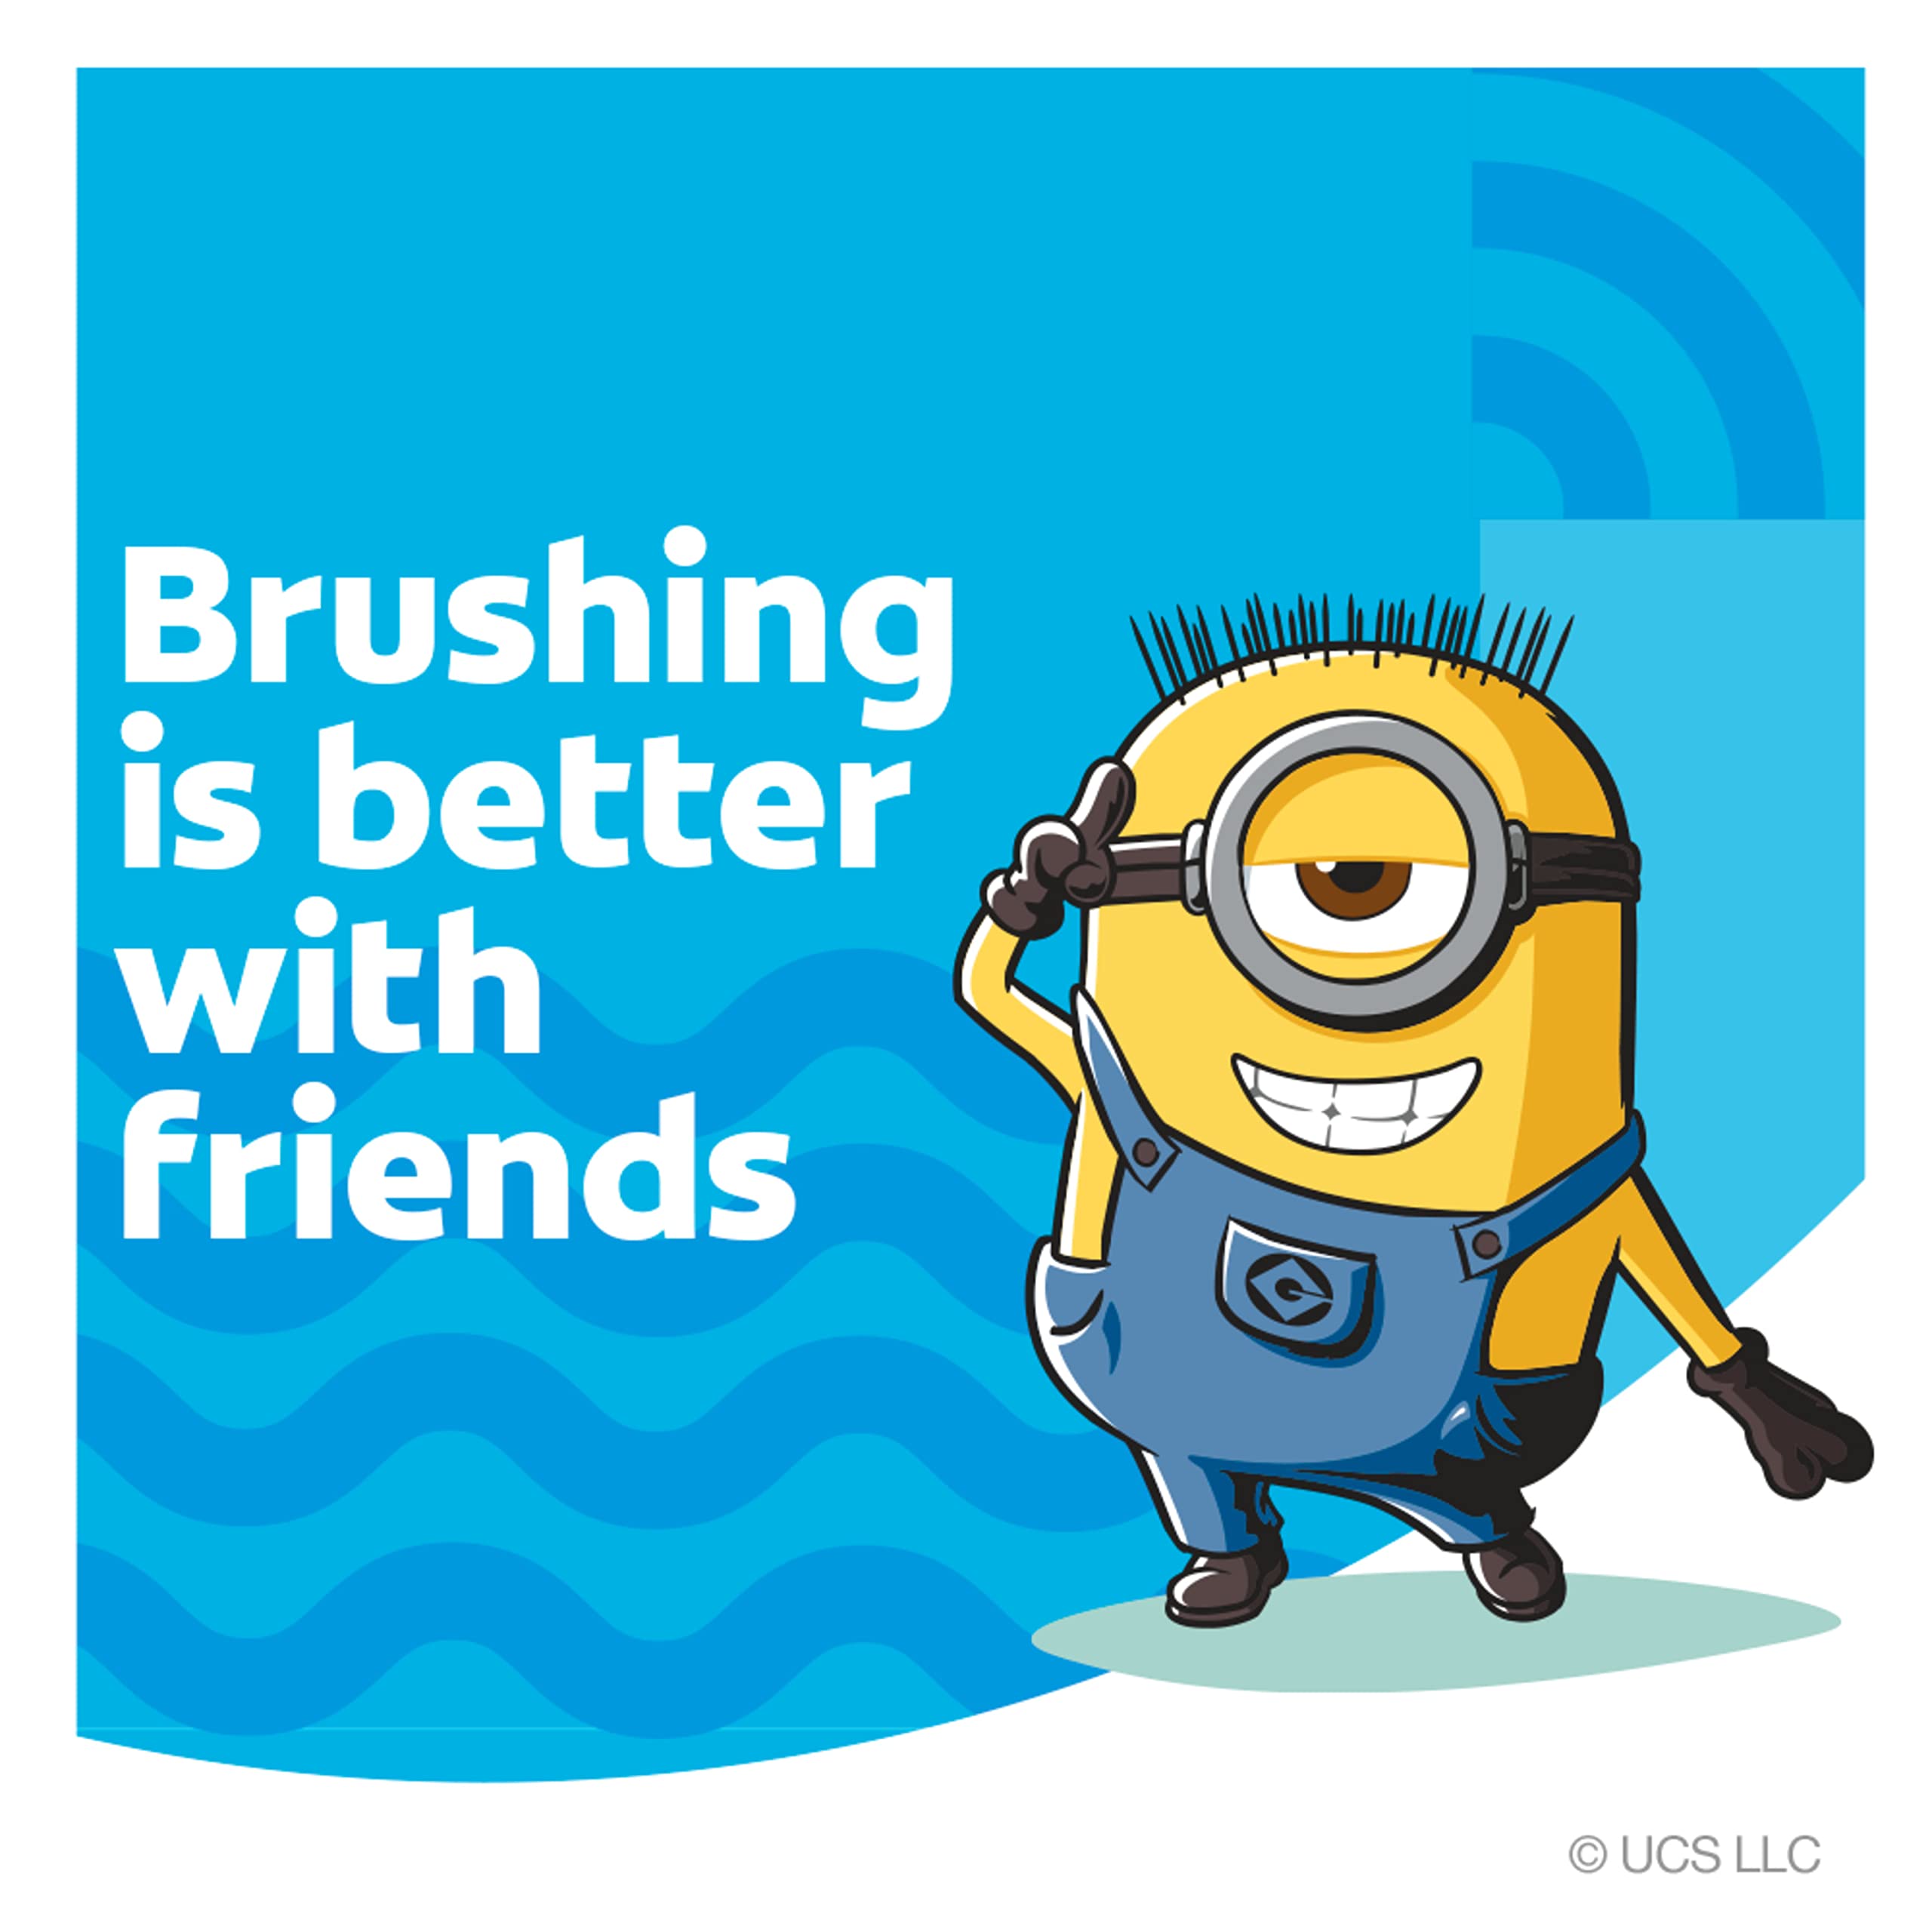 Colgate Kids Battery Powered Toothbrush, Kids Battery Toothbrush with Included AA Battery, Extra Soft Bristles, Flat-Laying Handle to Prevent Rolling, Minion Toothbrush, 1 Pack